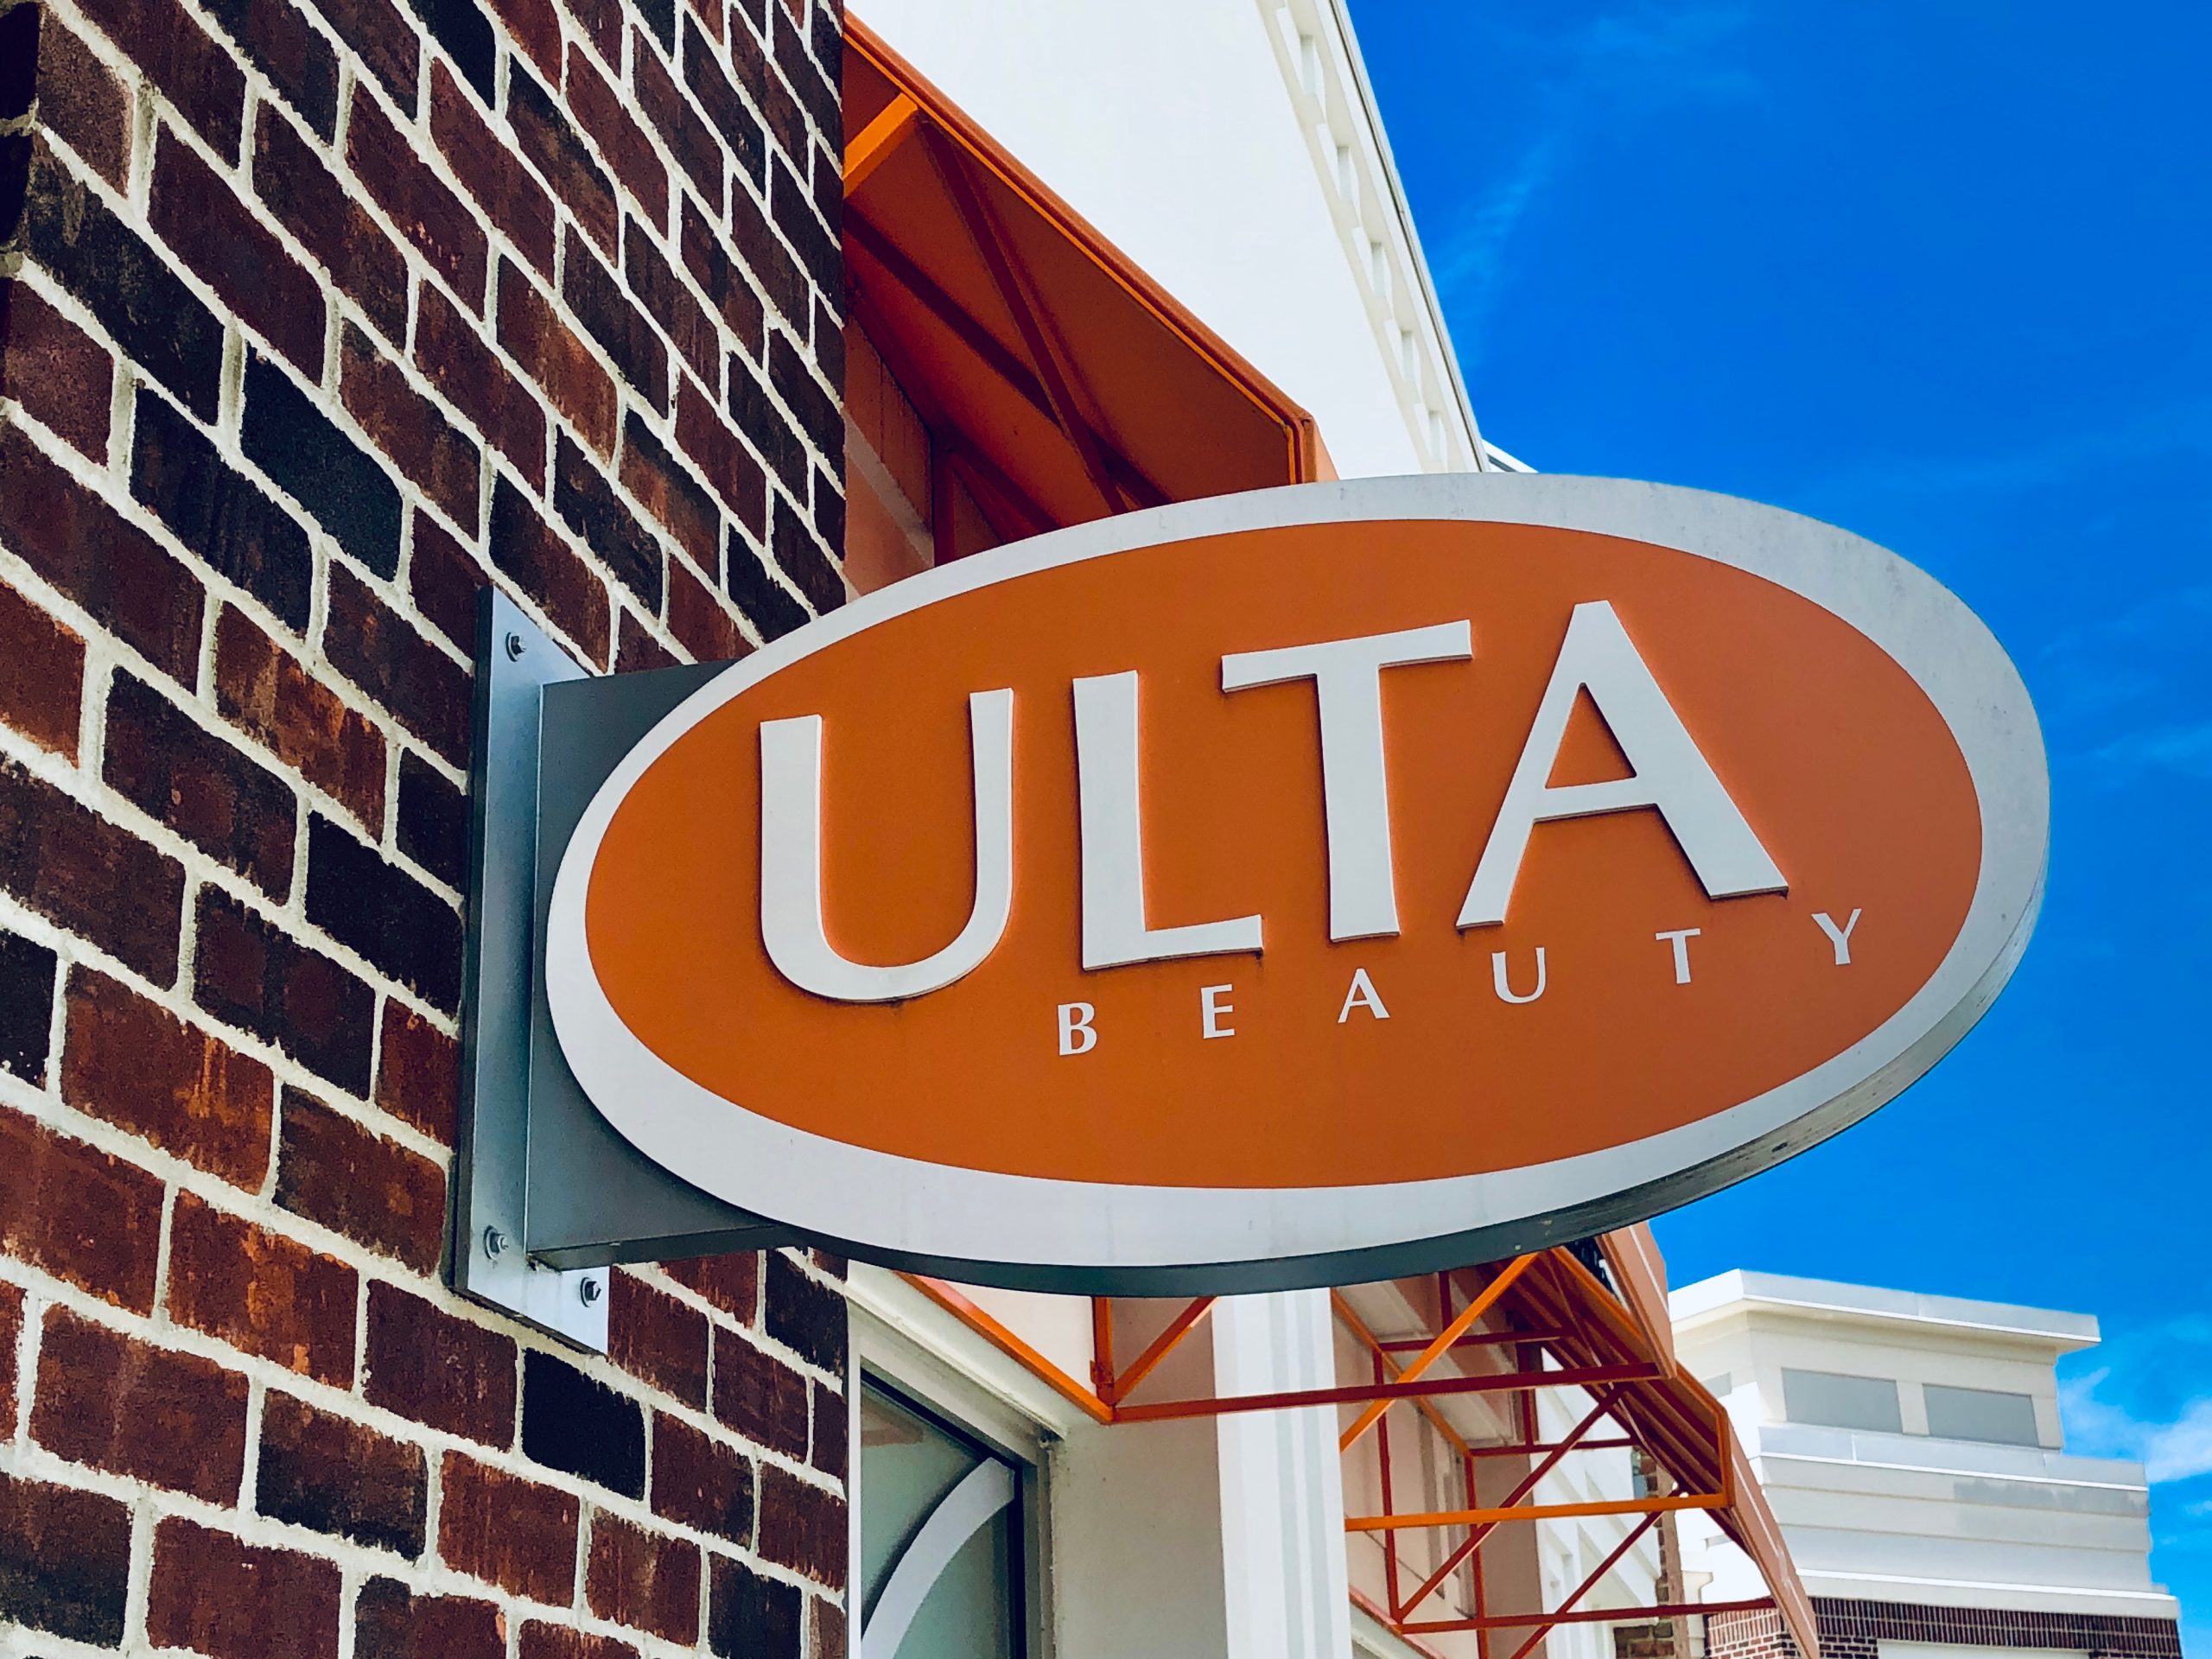 Ulta Beauty Plans 25-30 New Stores in Coming Year